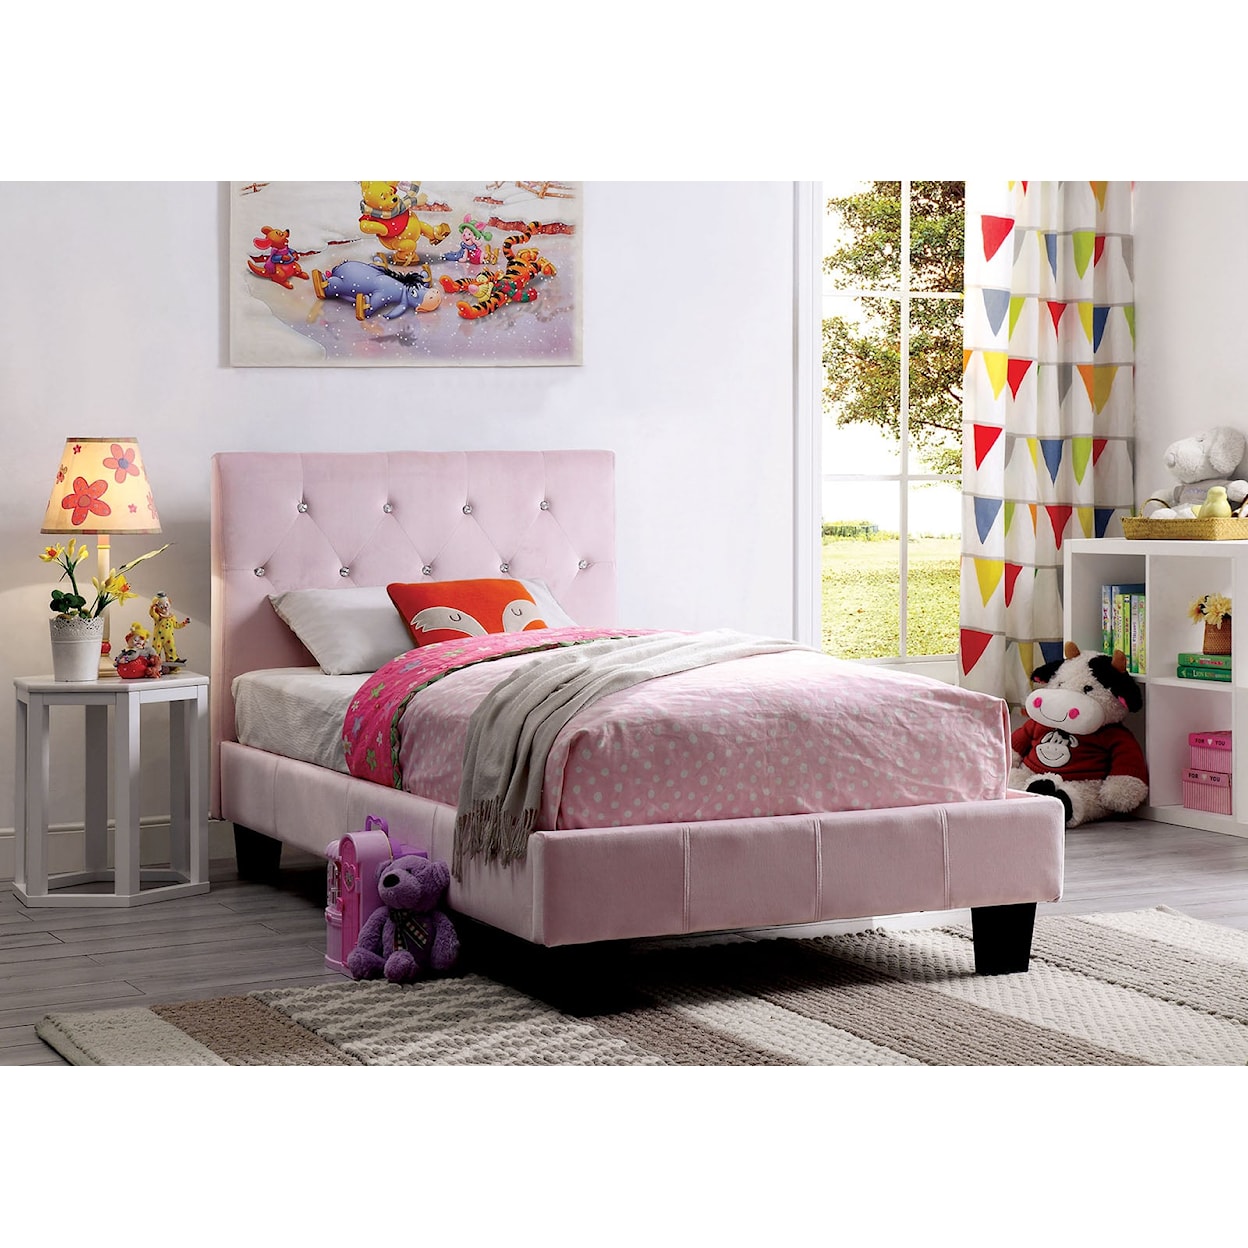 Furniture of America Velen PINK WITH JEWELS TWIN BED |